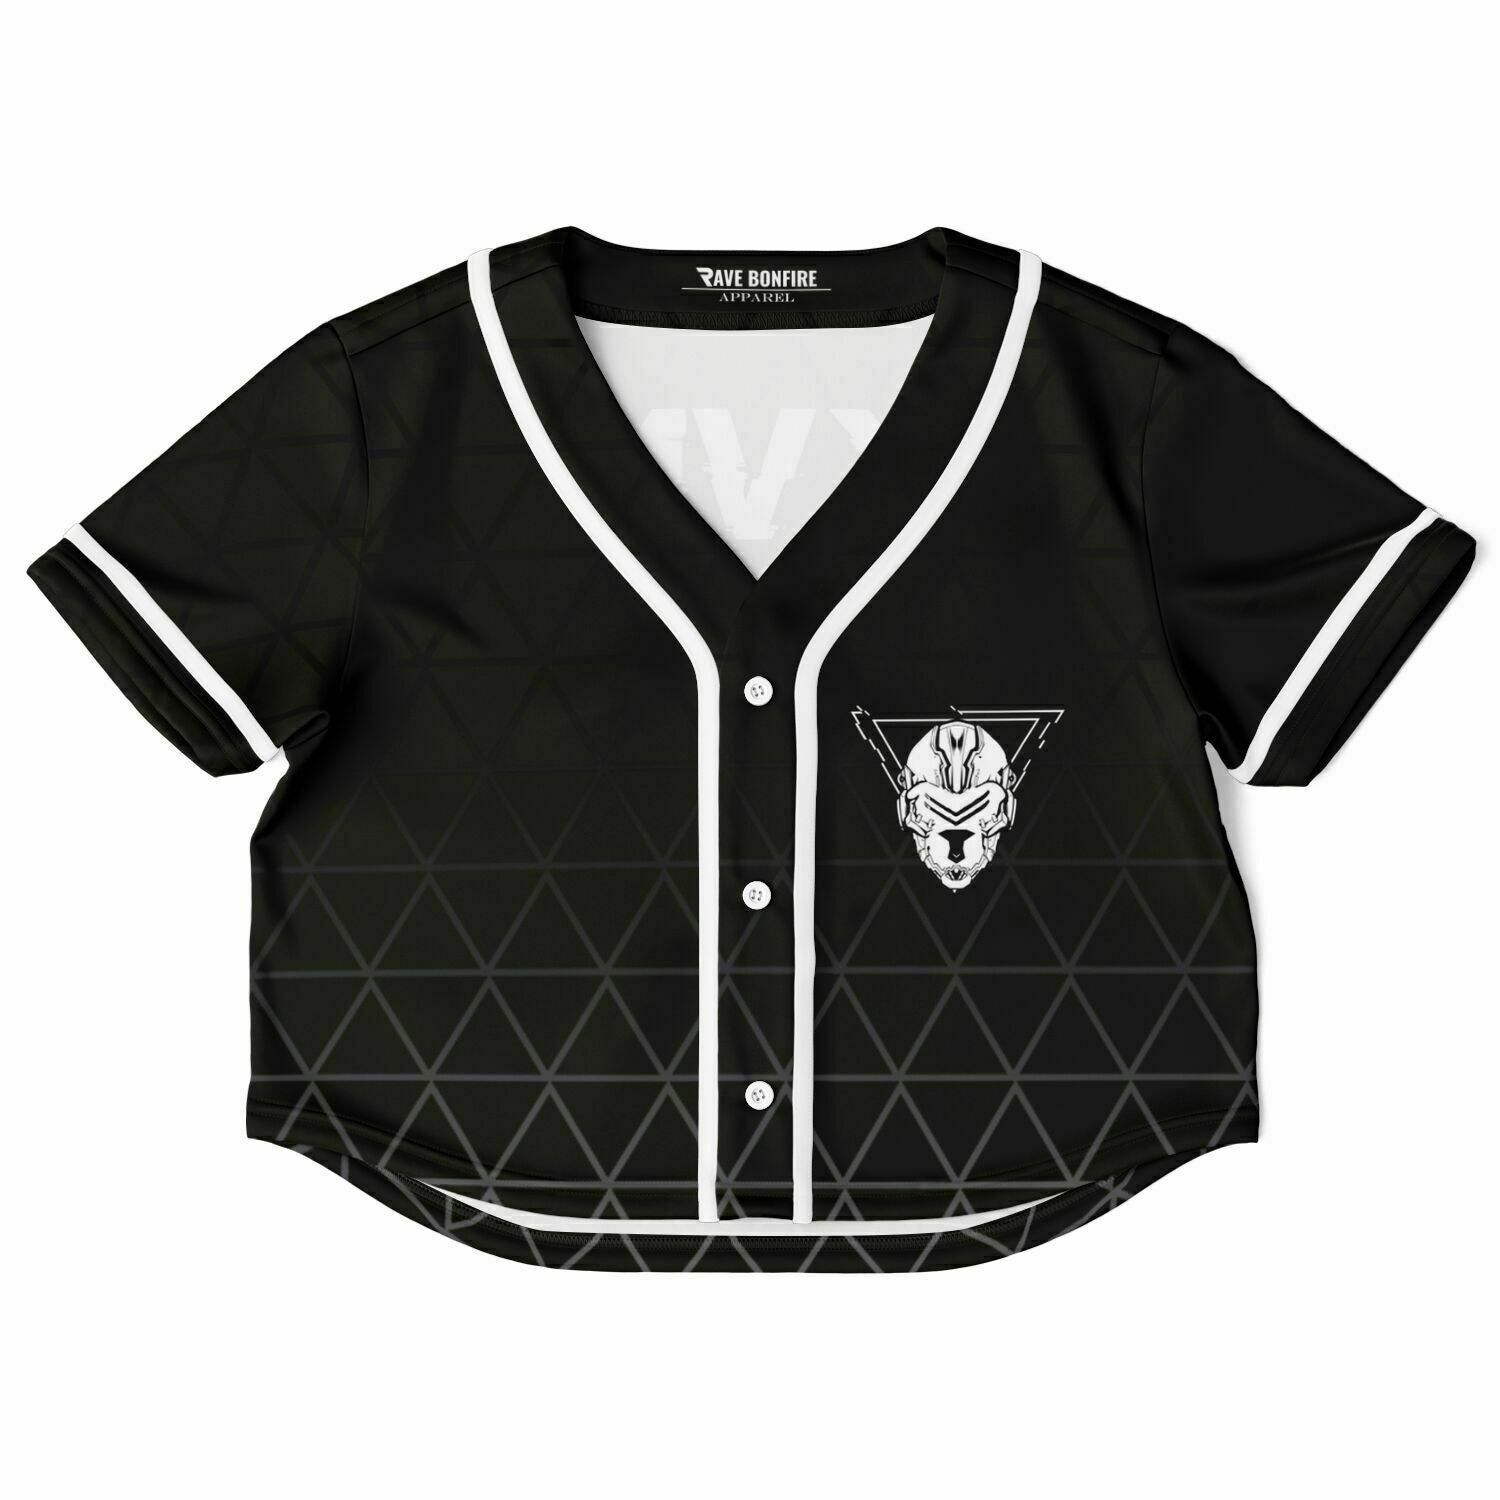 Checkered Molly Monster Smiley Face Black and White Baseball Jersey M | Rave Wonderland | Outfits Rave | Festival Outfits | Rave Clothes